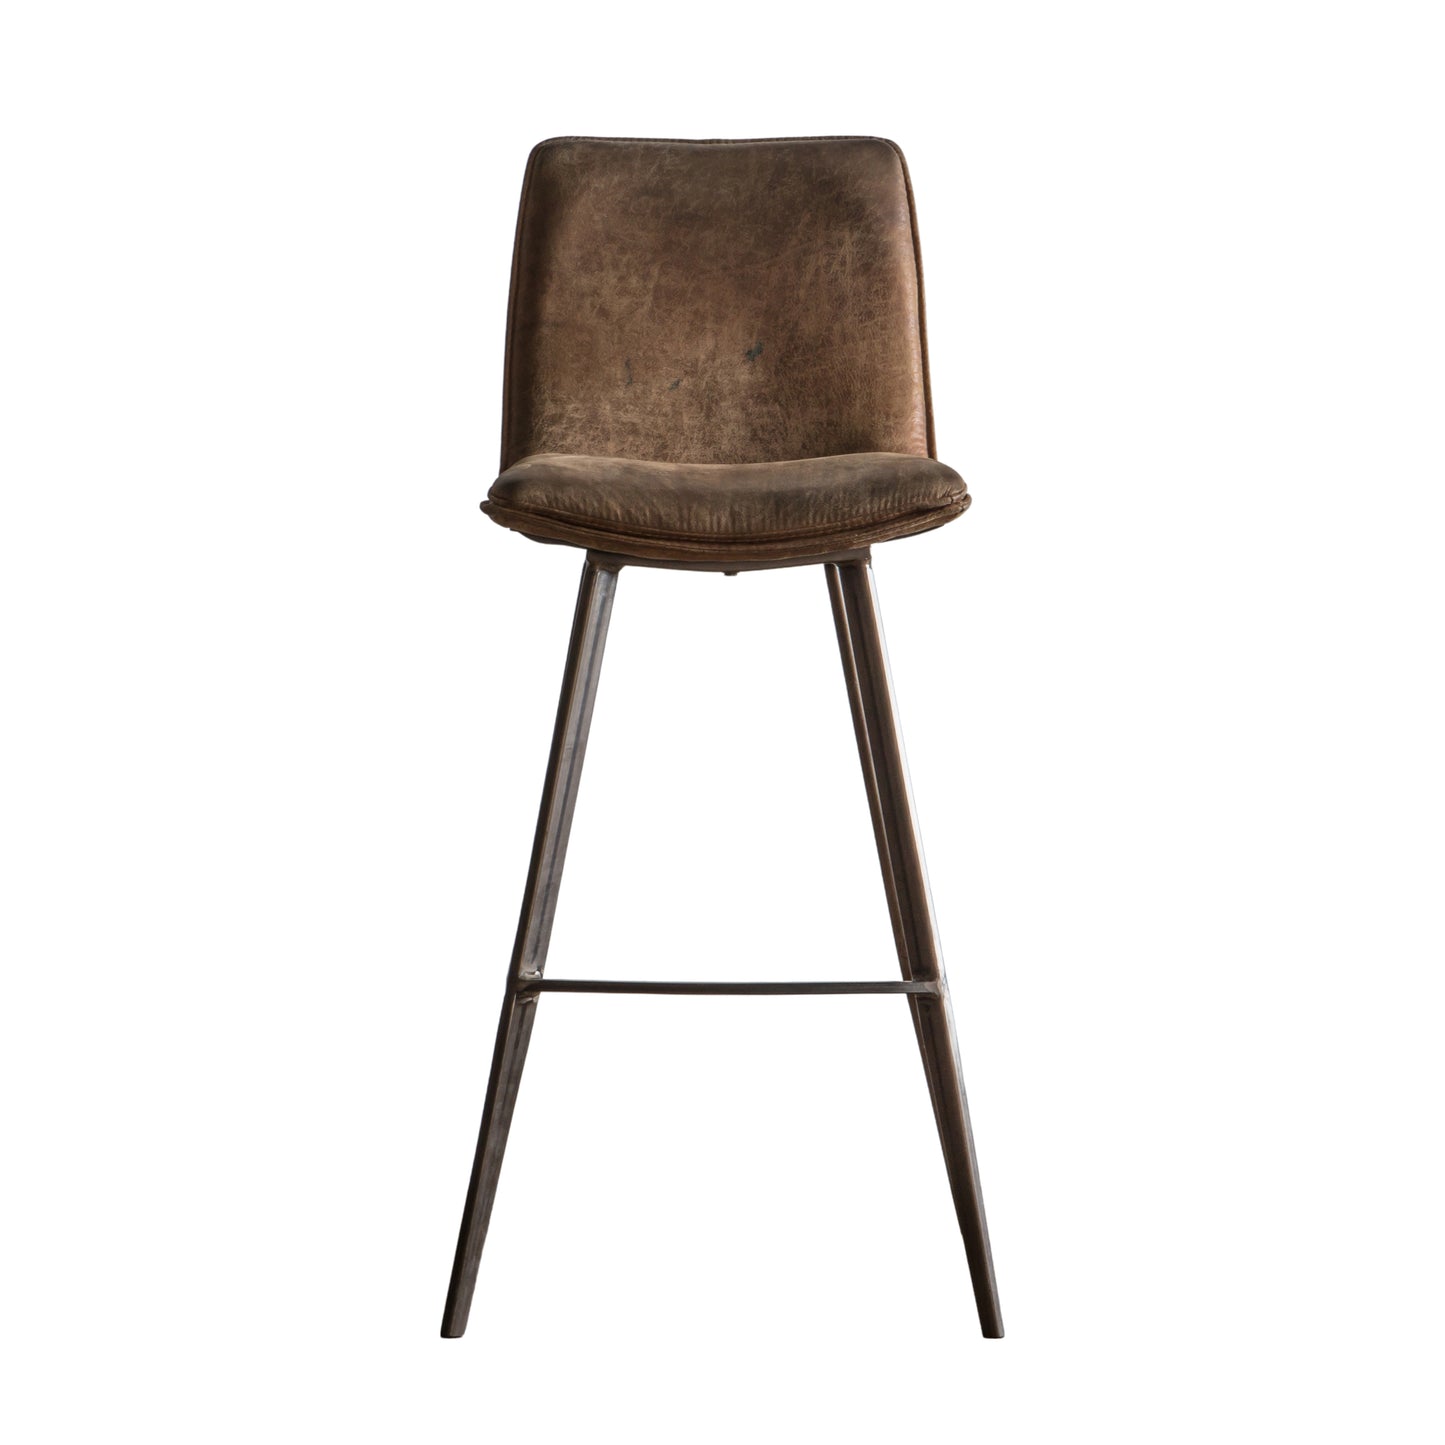 A Palmer Brown Stool (2pk) with metal legs for home furniture and interior decor from Kikiathome.co.uk.